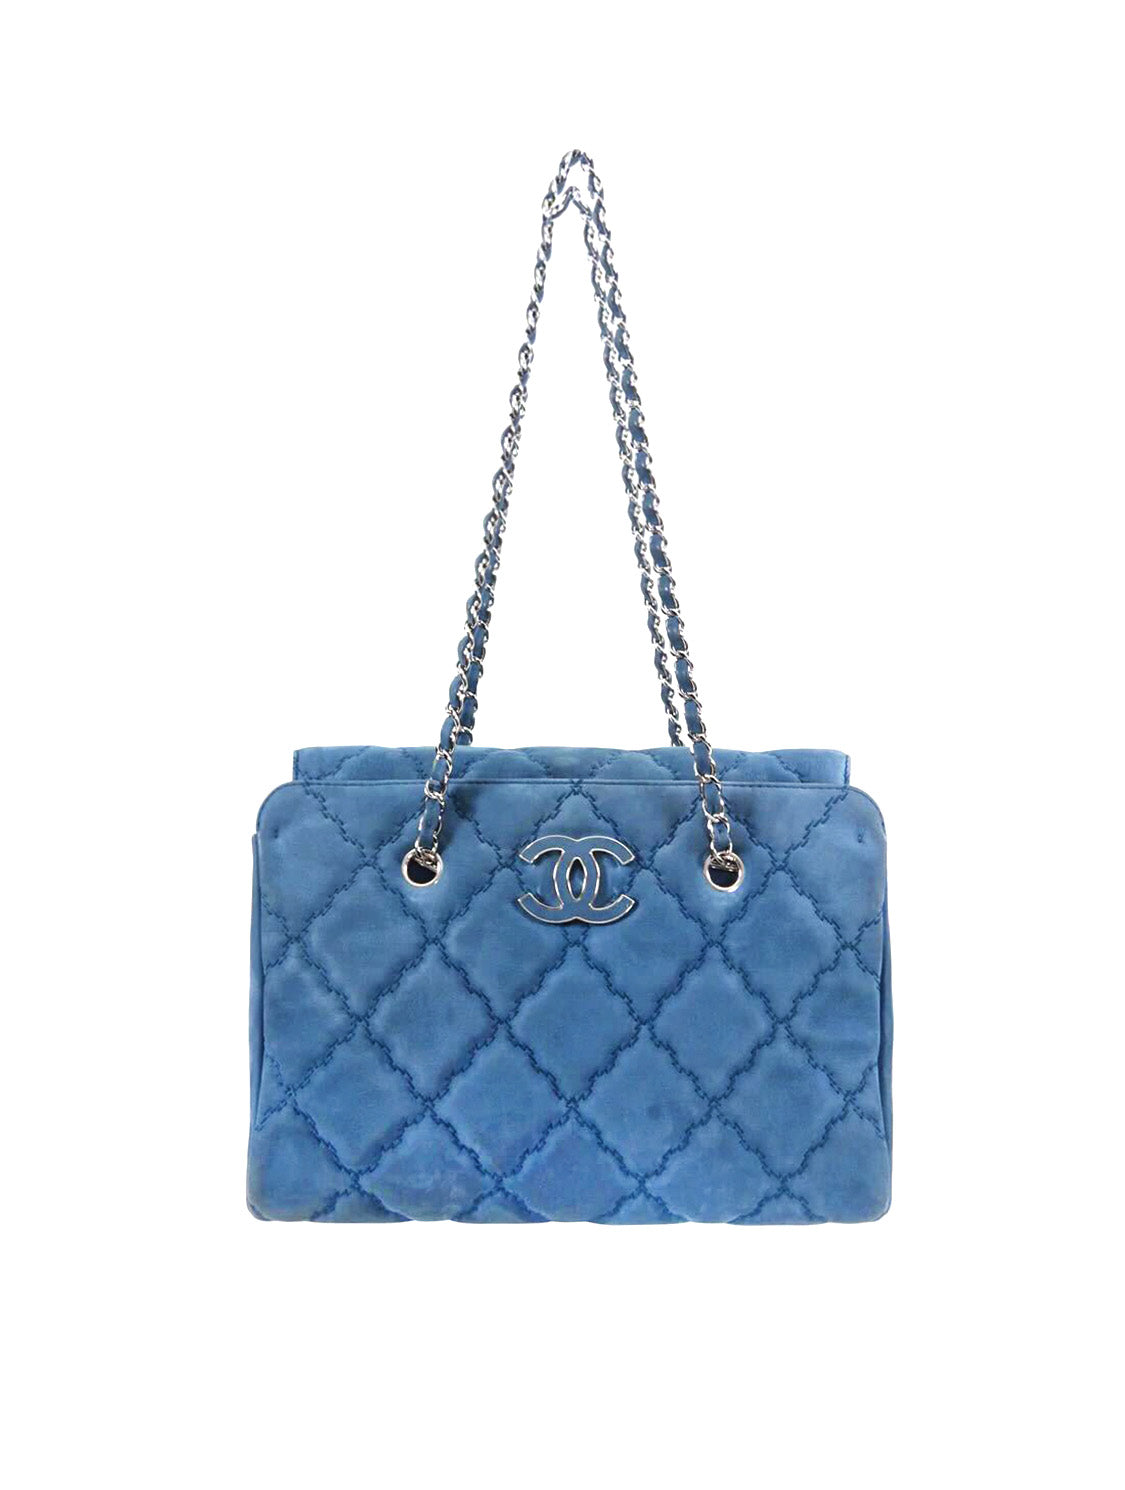 Chanel New Mini Timeless Shoulder bag in beige leather & blue navy cotton,  GHW